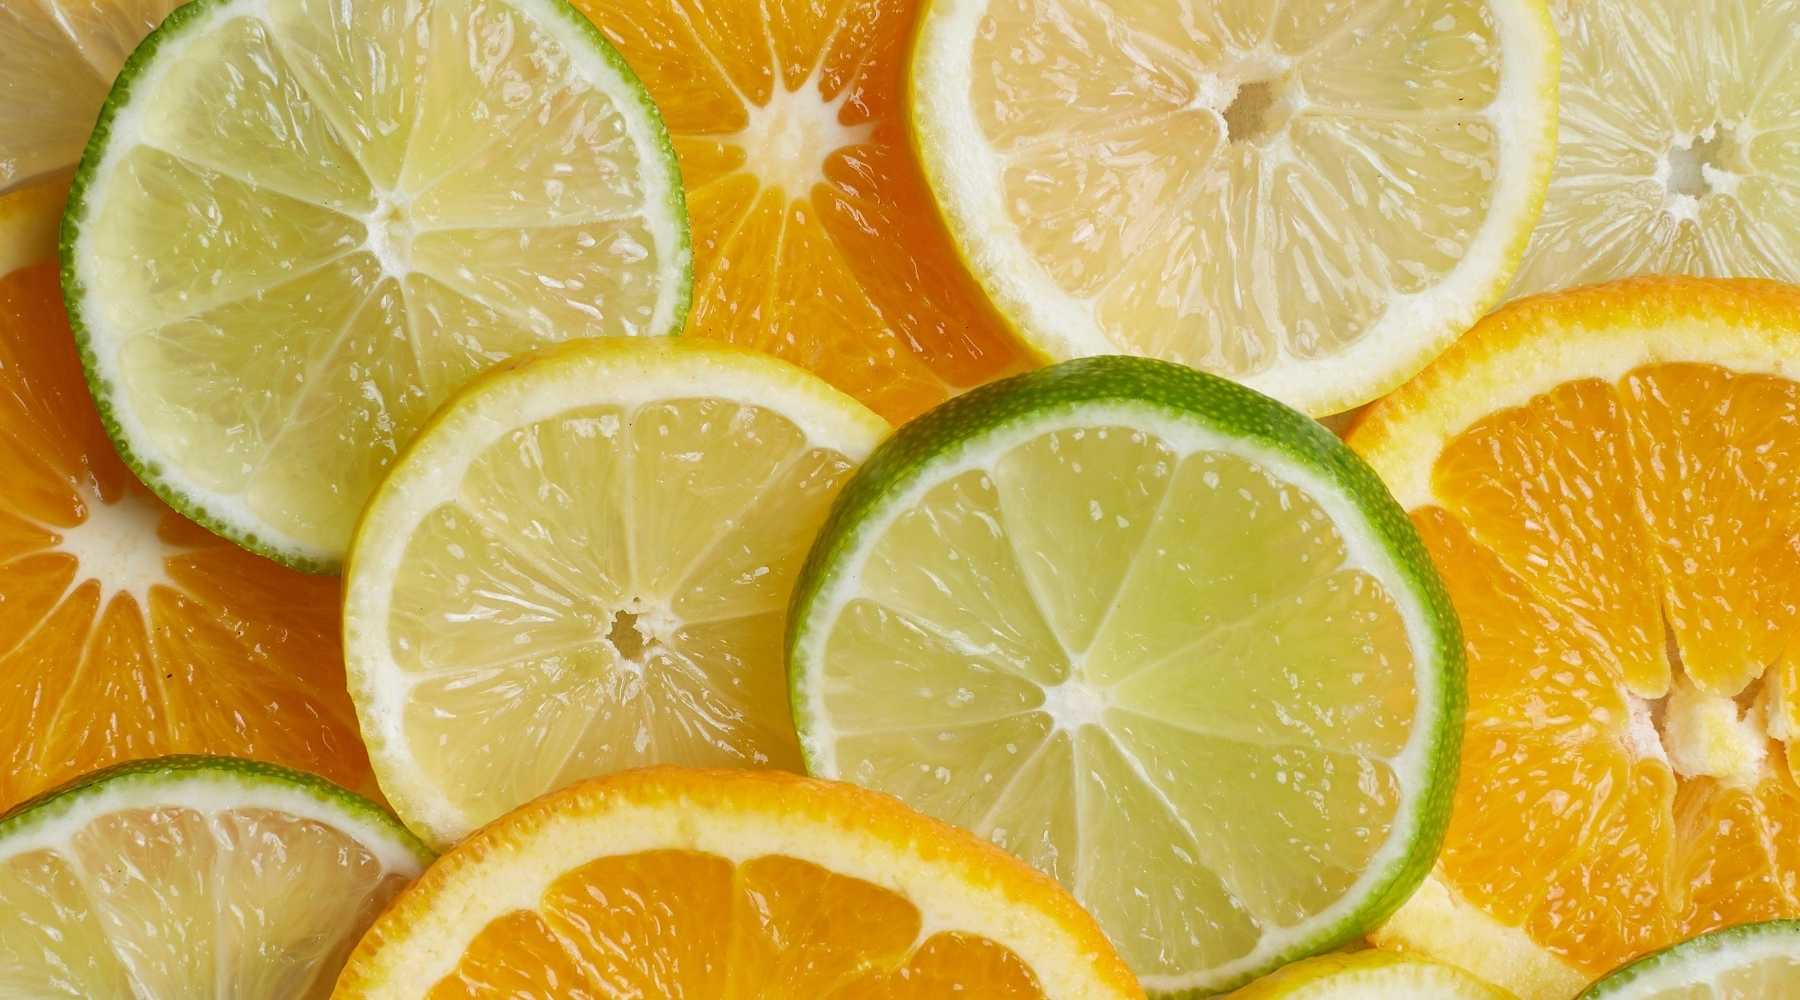 What Makes Citrus So Healthy